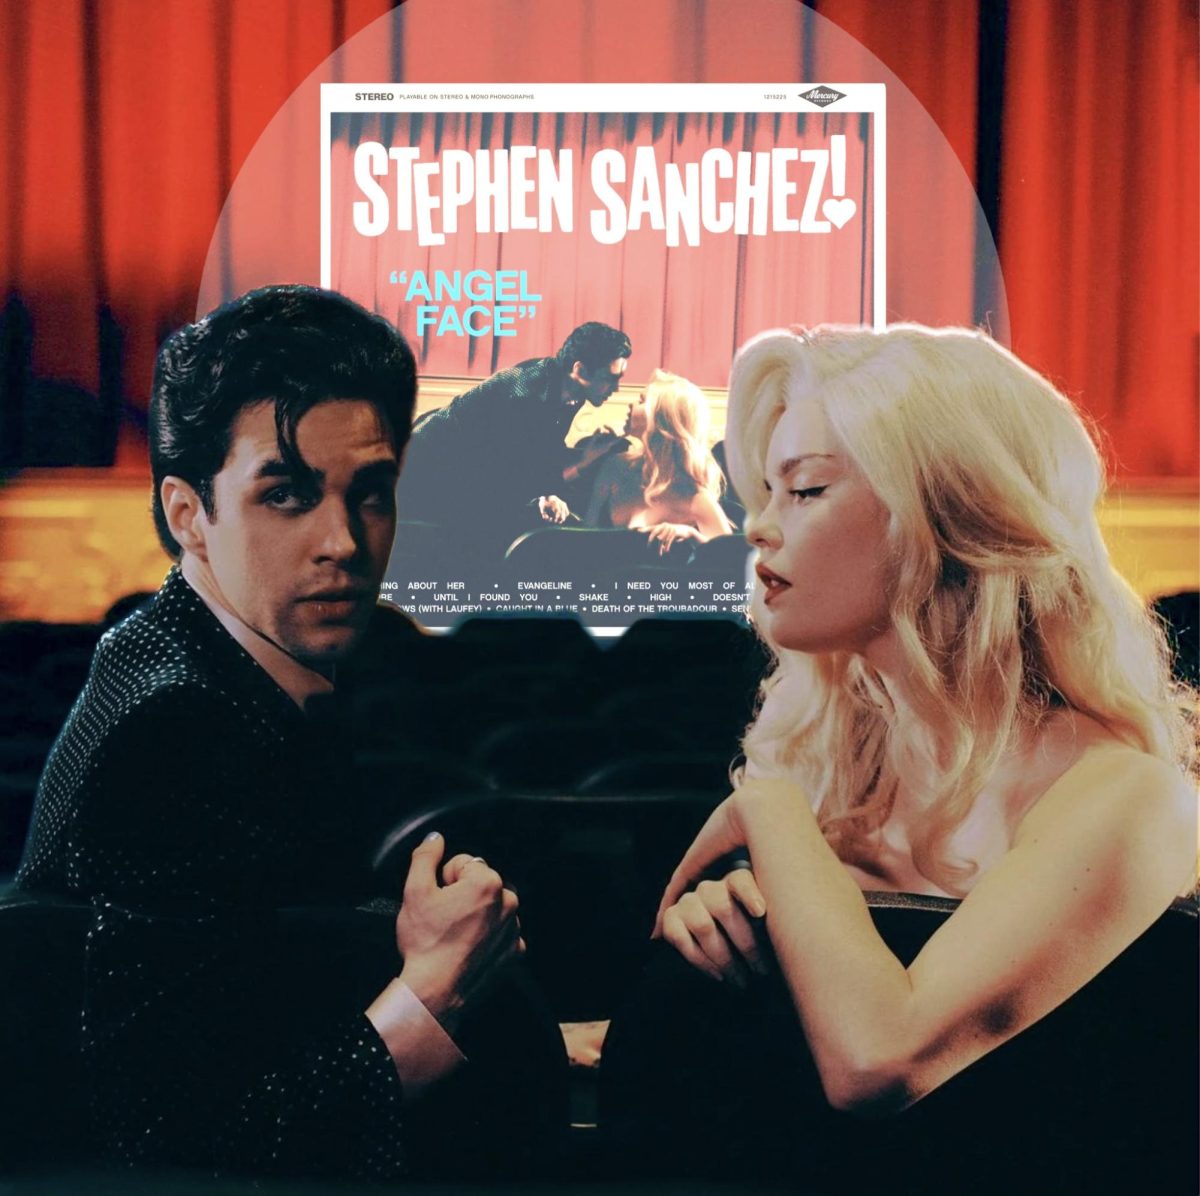 A graphic comprising the “Angel Face” album cover and images from its promotion shoot depict Stephen Sanchez as his fictional self “The Troubadour” with his love, “Evangeline.” Sanchez released his second album on September 22, 2023. He has recently started his tour, and is performing in Dallas, Texas on November 11th. 